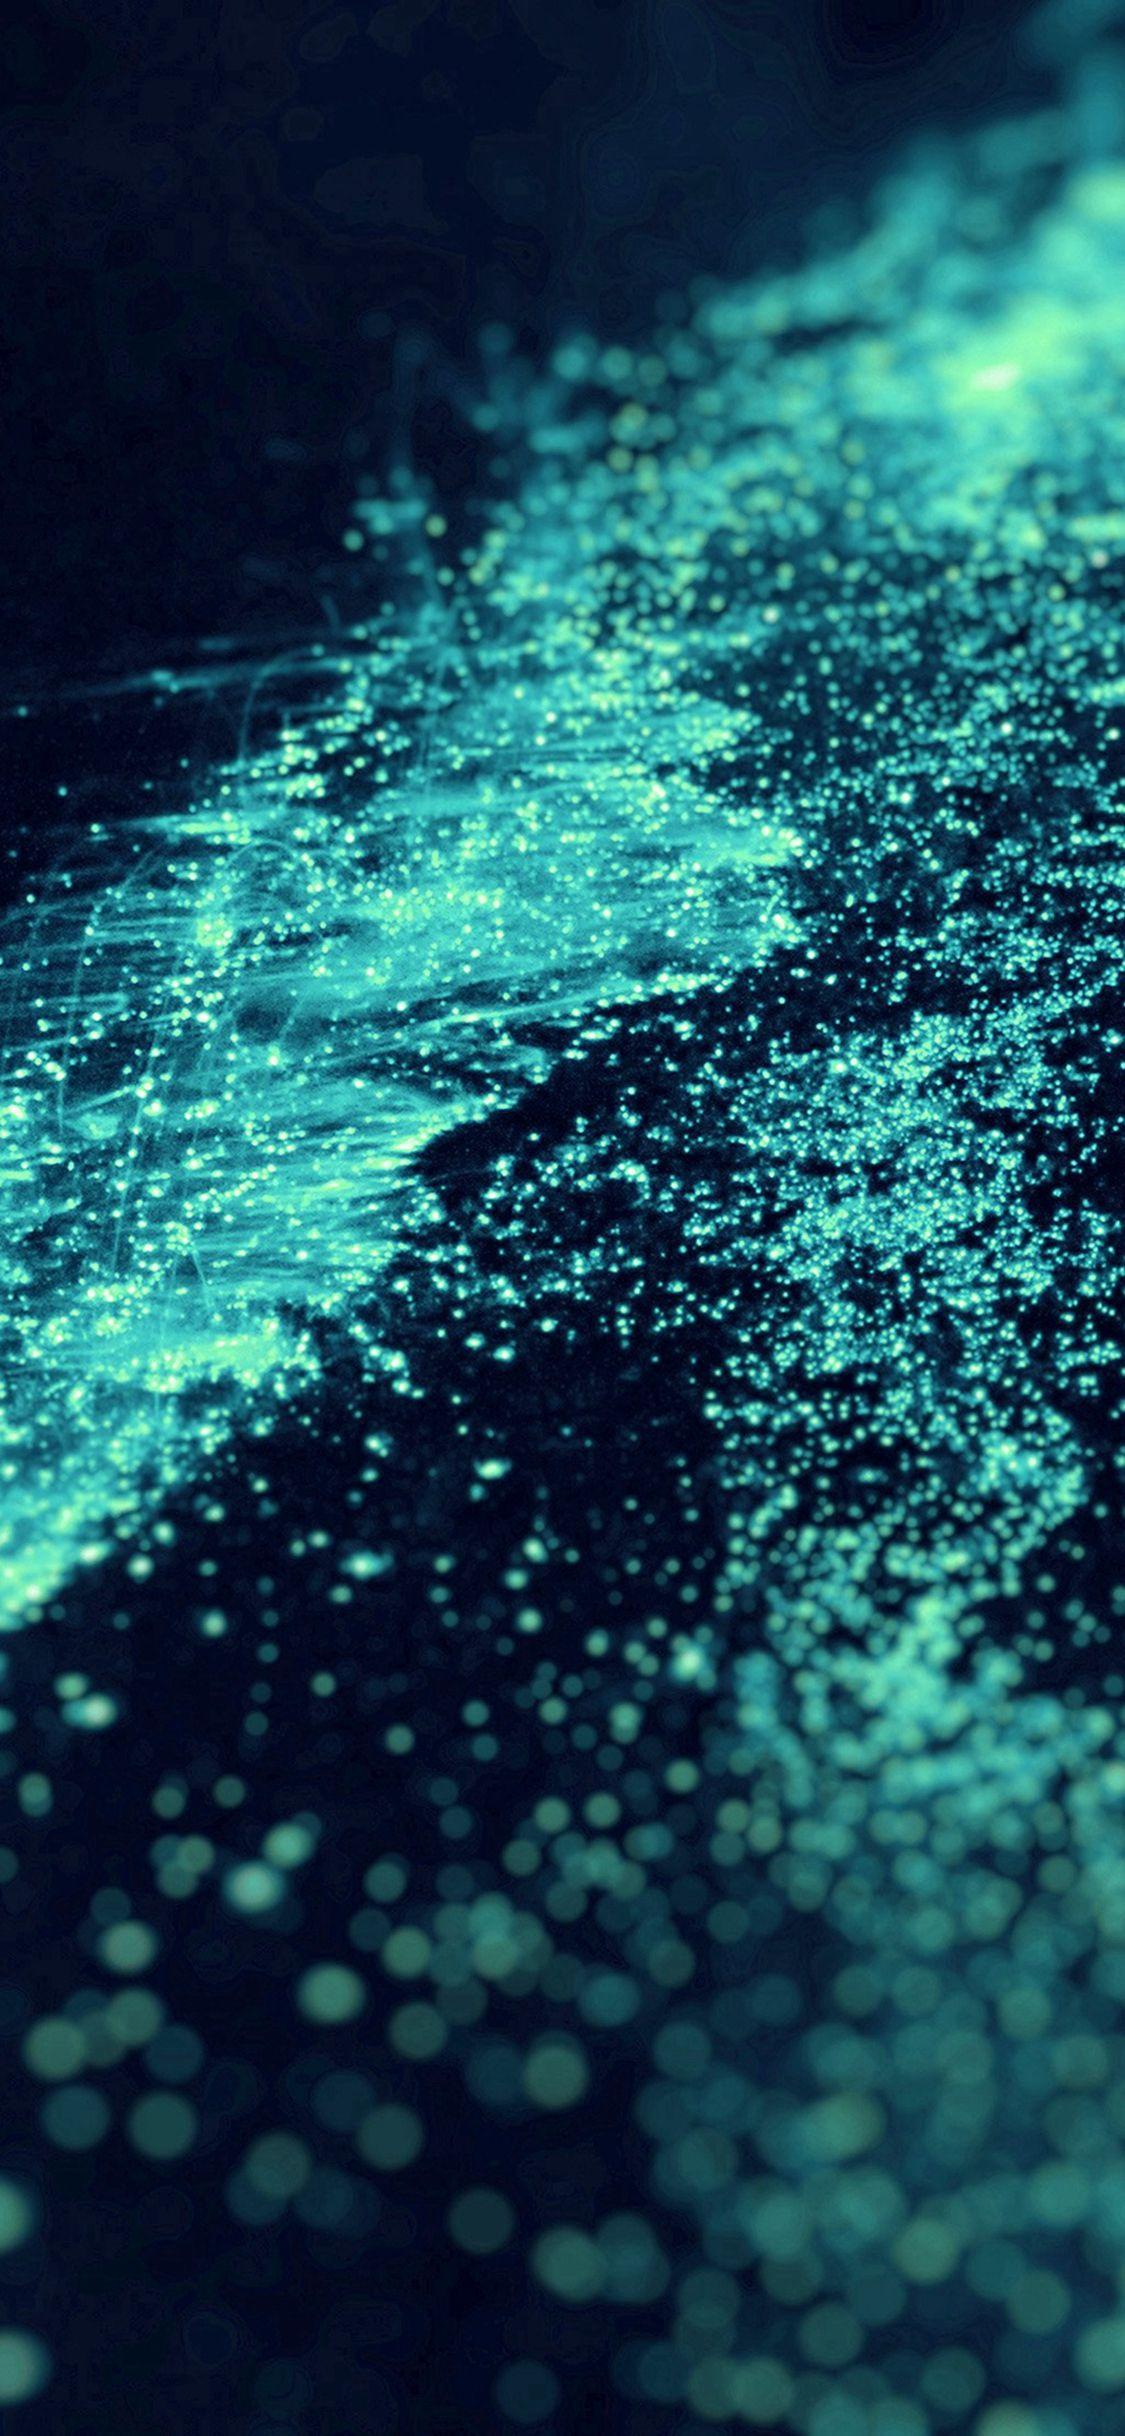 Teal And Black Wallpaper 55 images